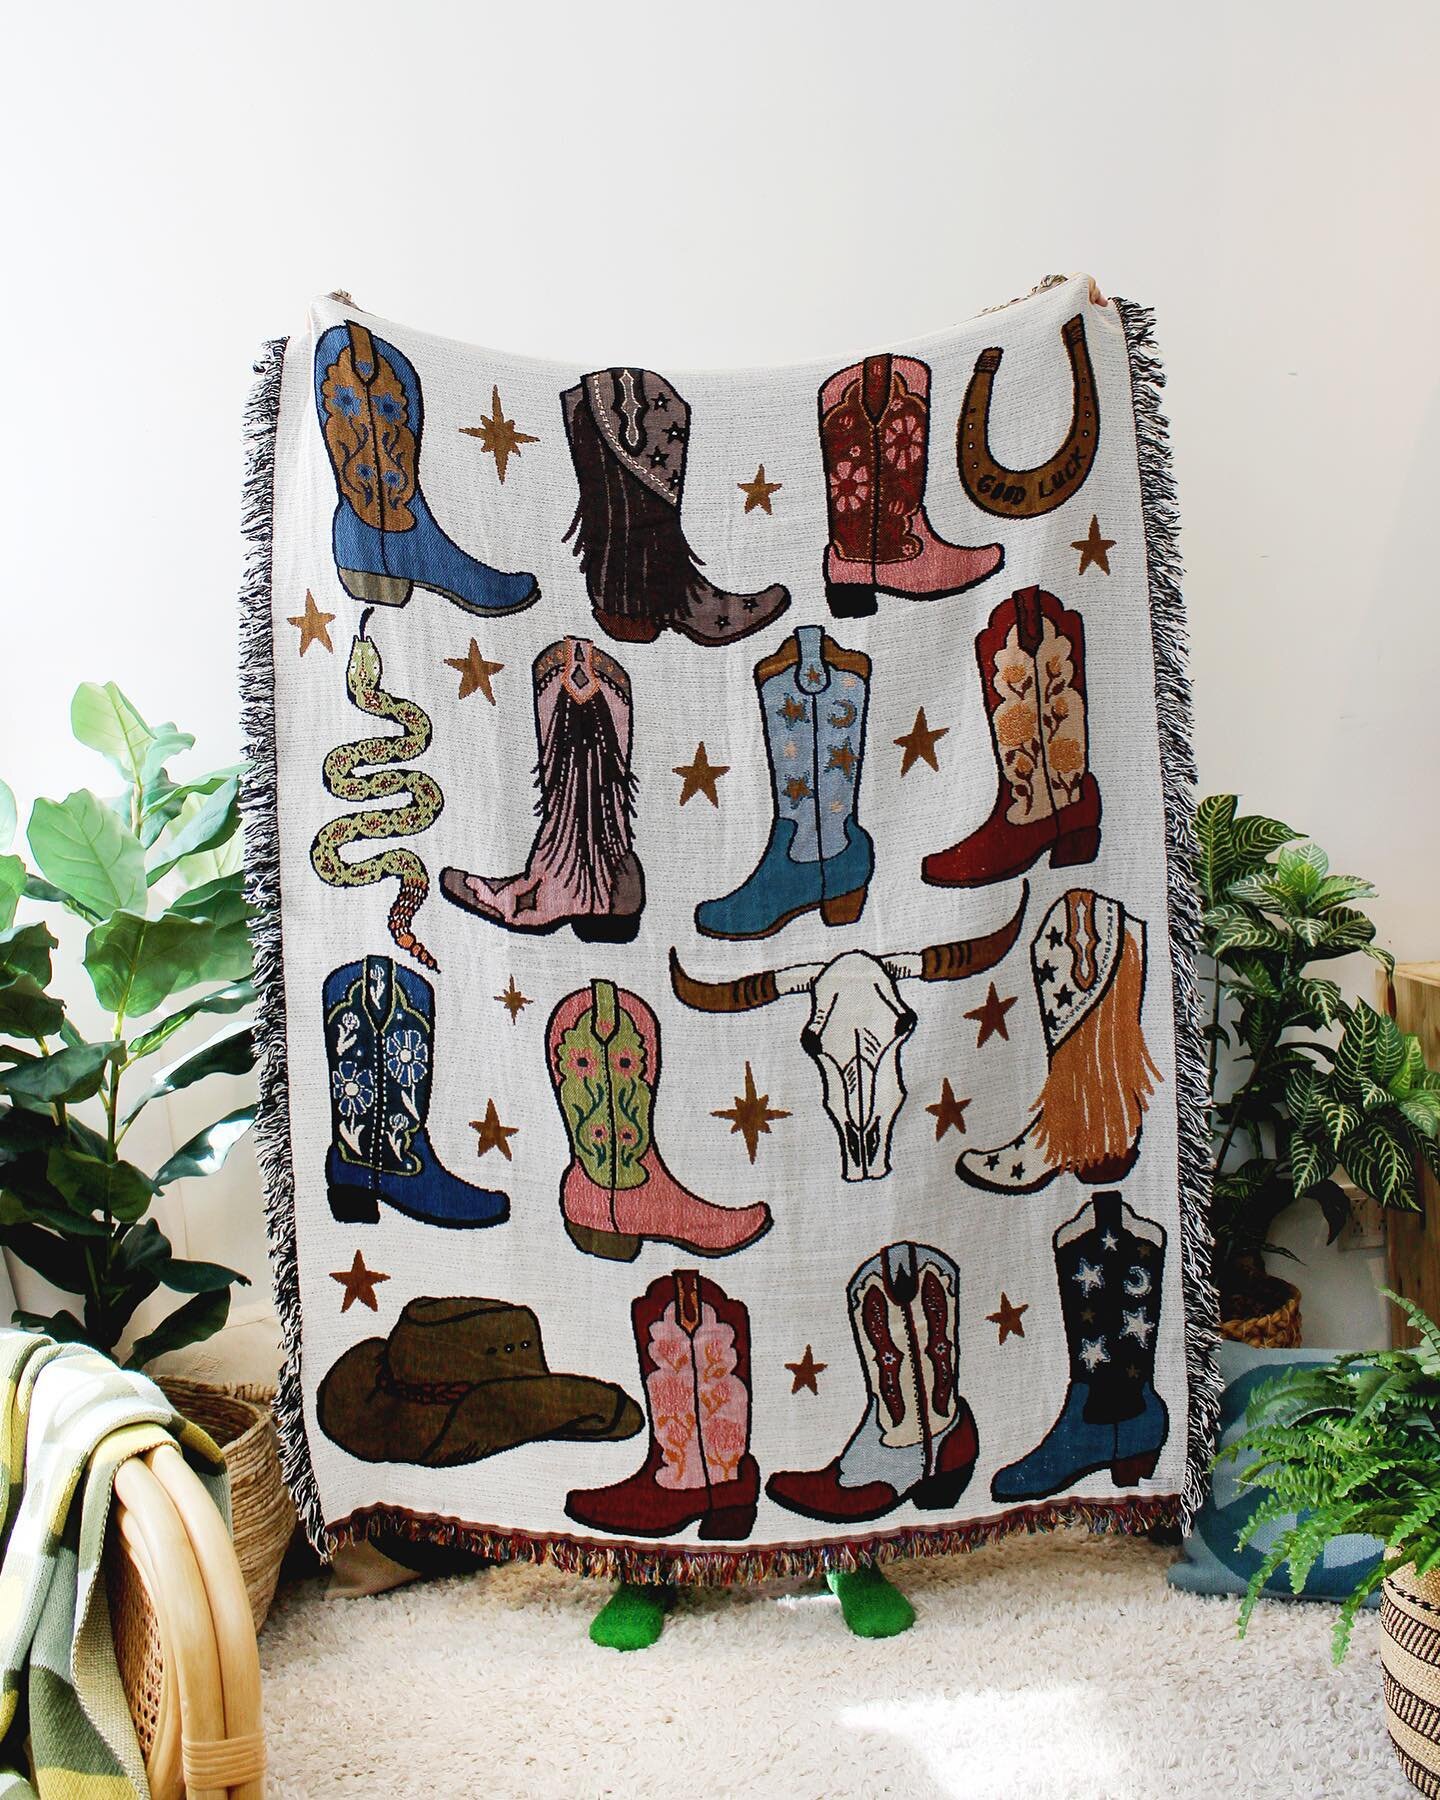 Howdy Cowgirl! Back In Stock!!! 🤠 also available in person at our booth in Union Square @urbanspacemarkets @kewl_street